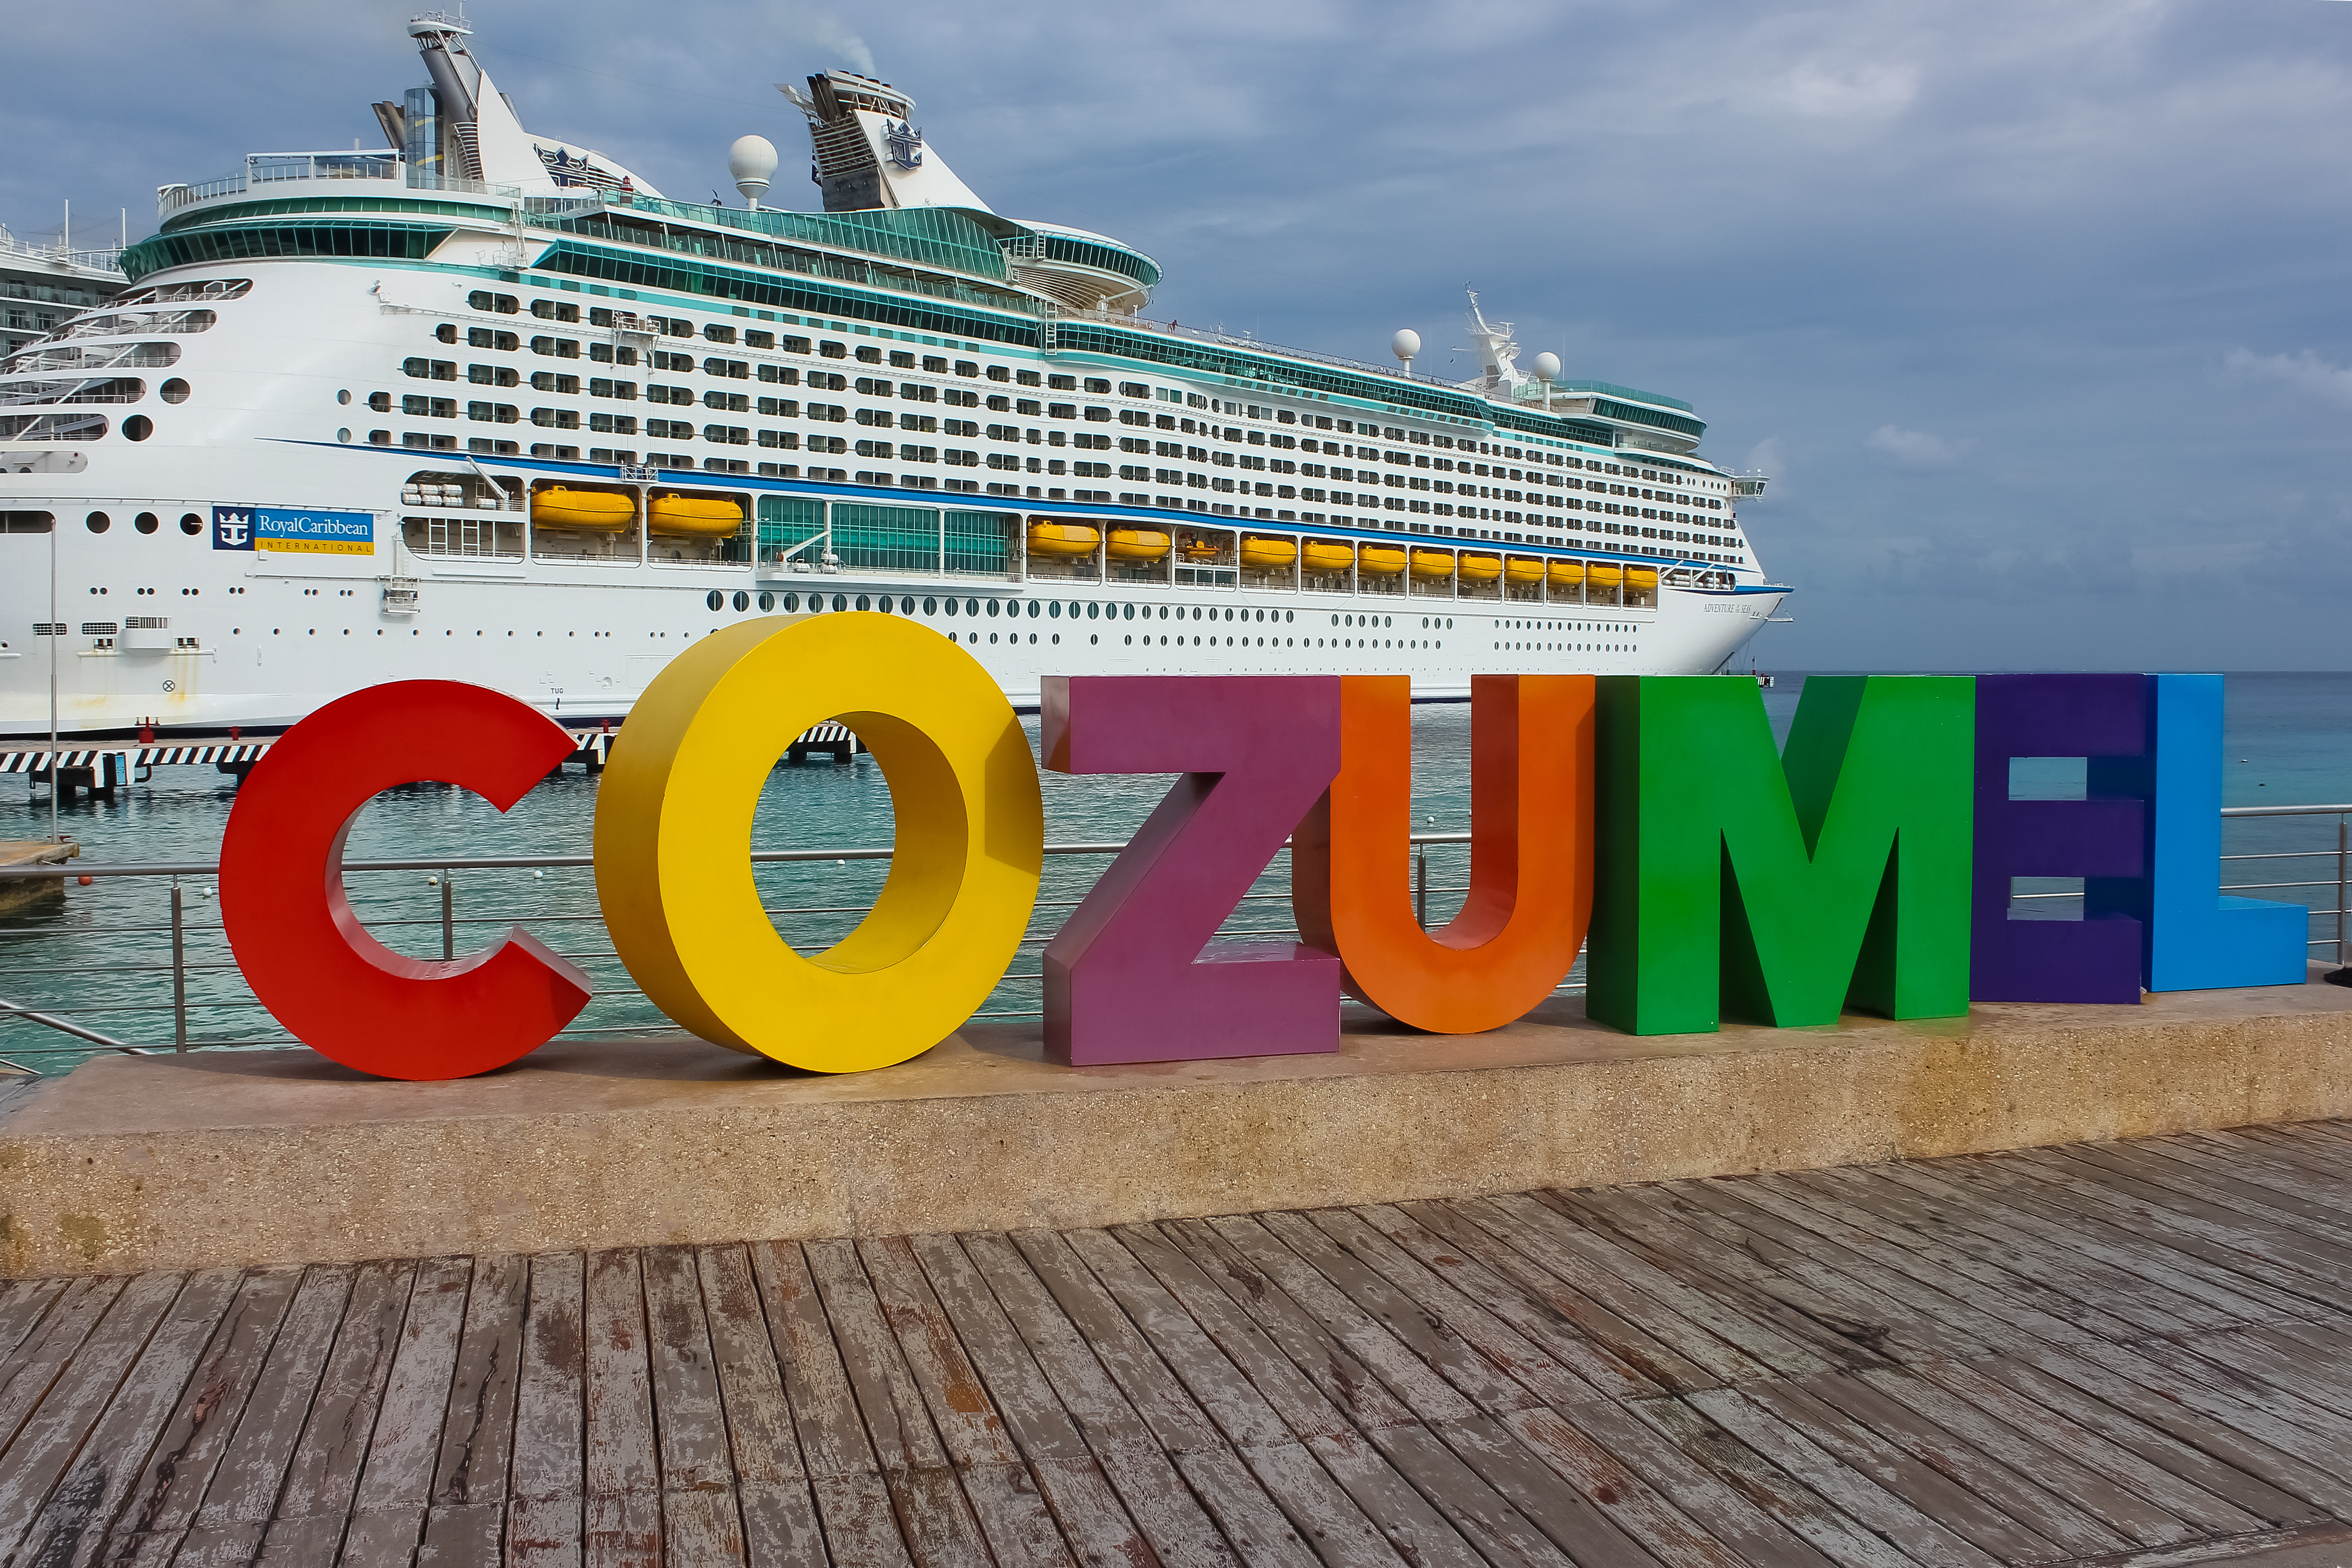 The tropical paradise of Cozumel, Mexico